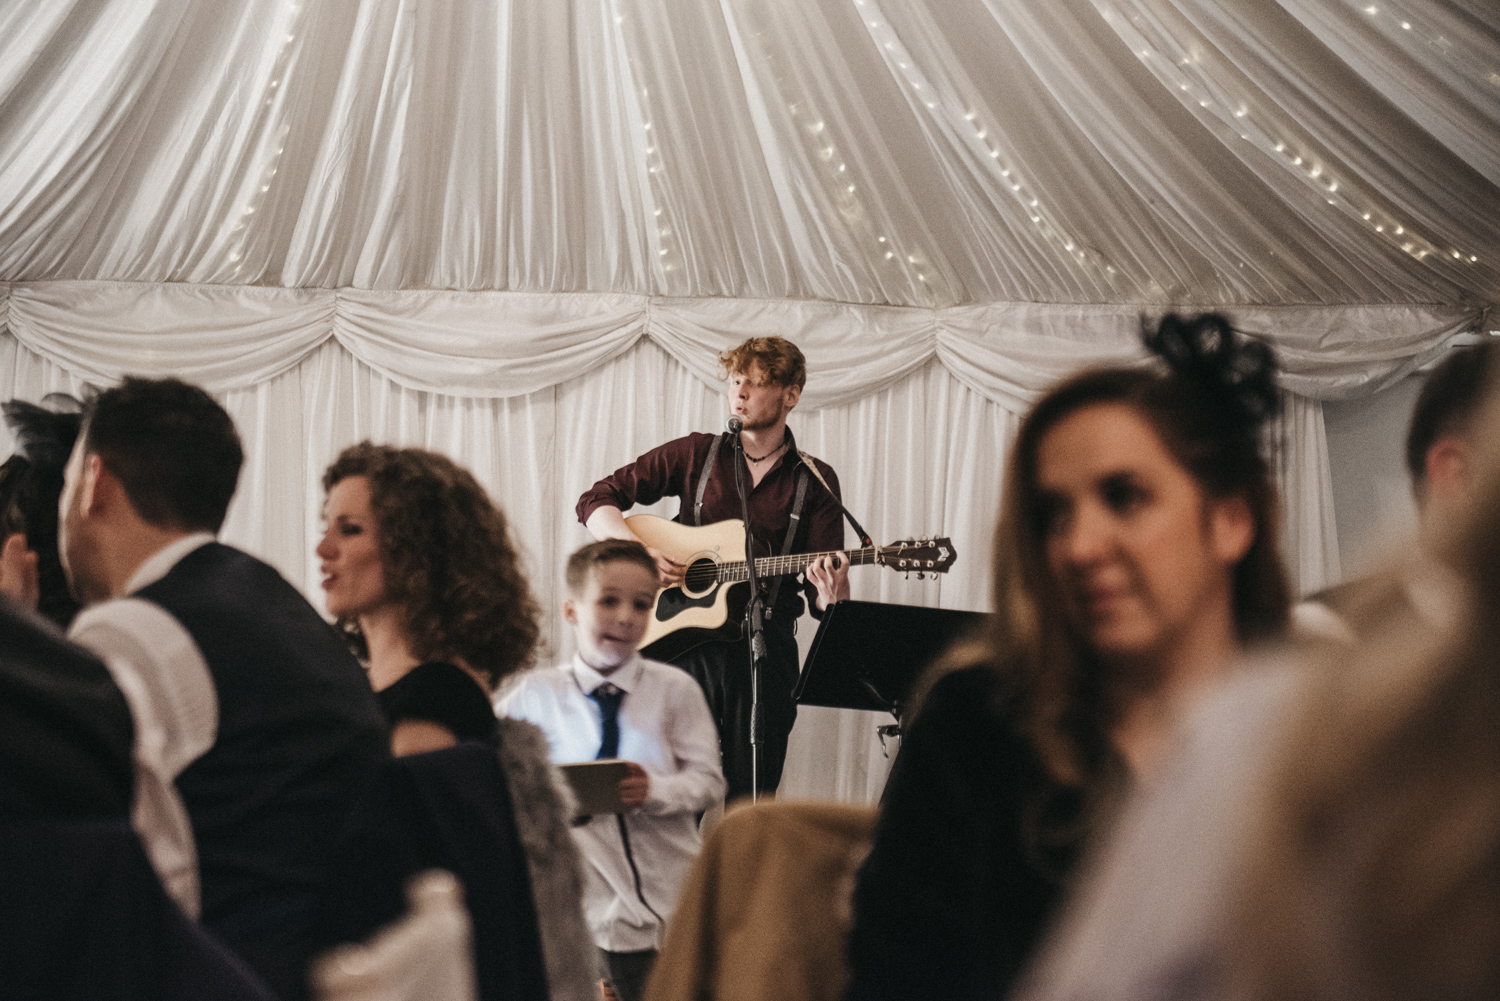 Wedding band entertaining guests